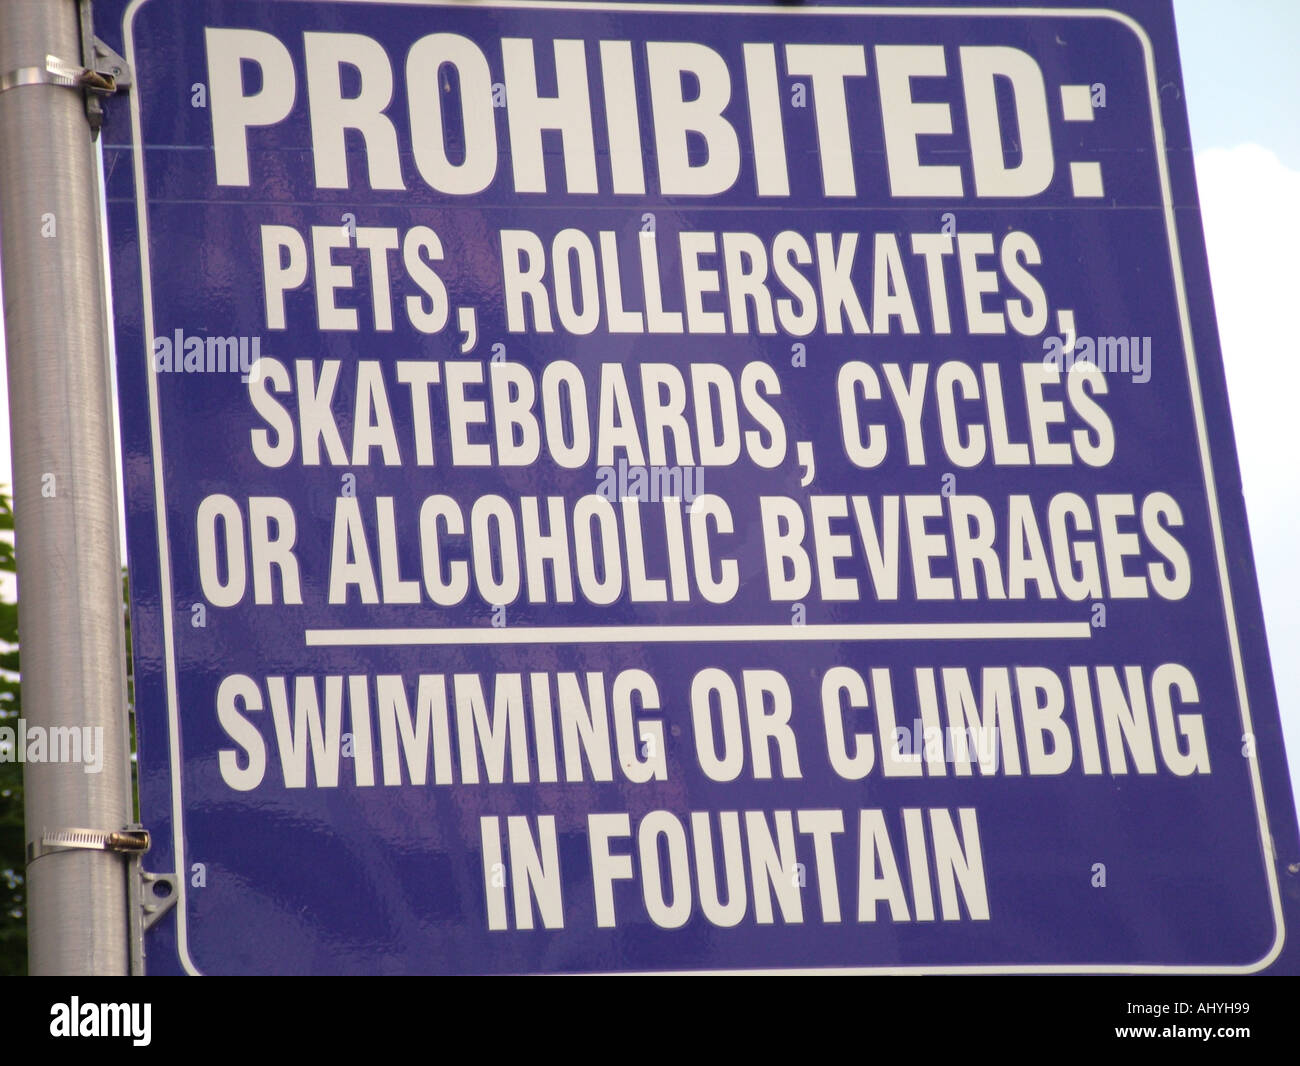 AJD45869, restricted signs, Prohibited: Pets, Rollerskates, Skateboards, Cycles, or Alcoholic or Climbing in Fountain Stock Photo